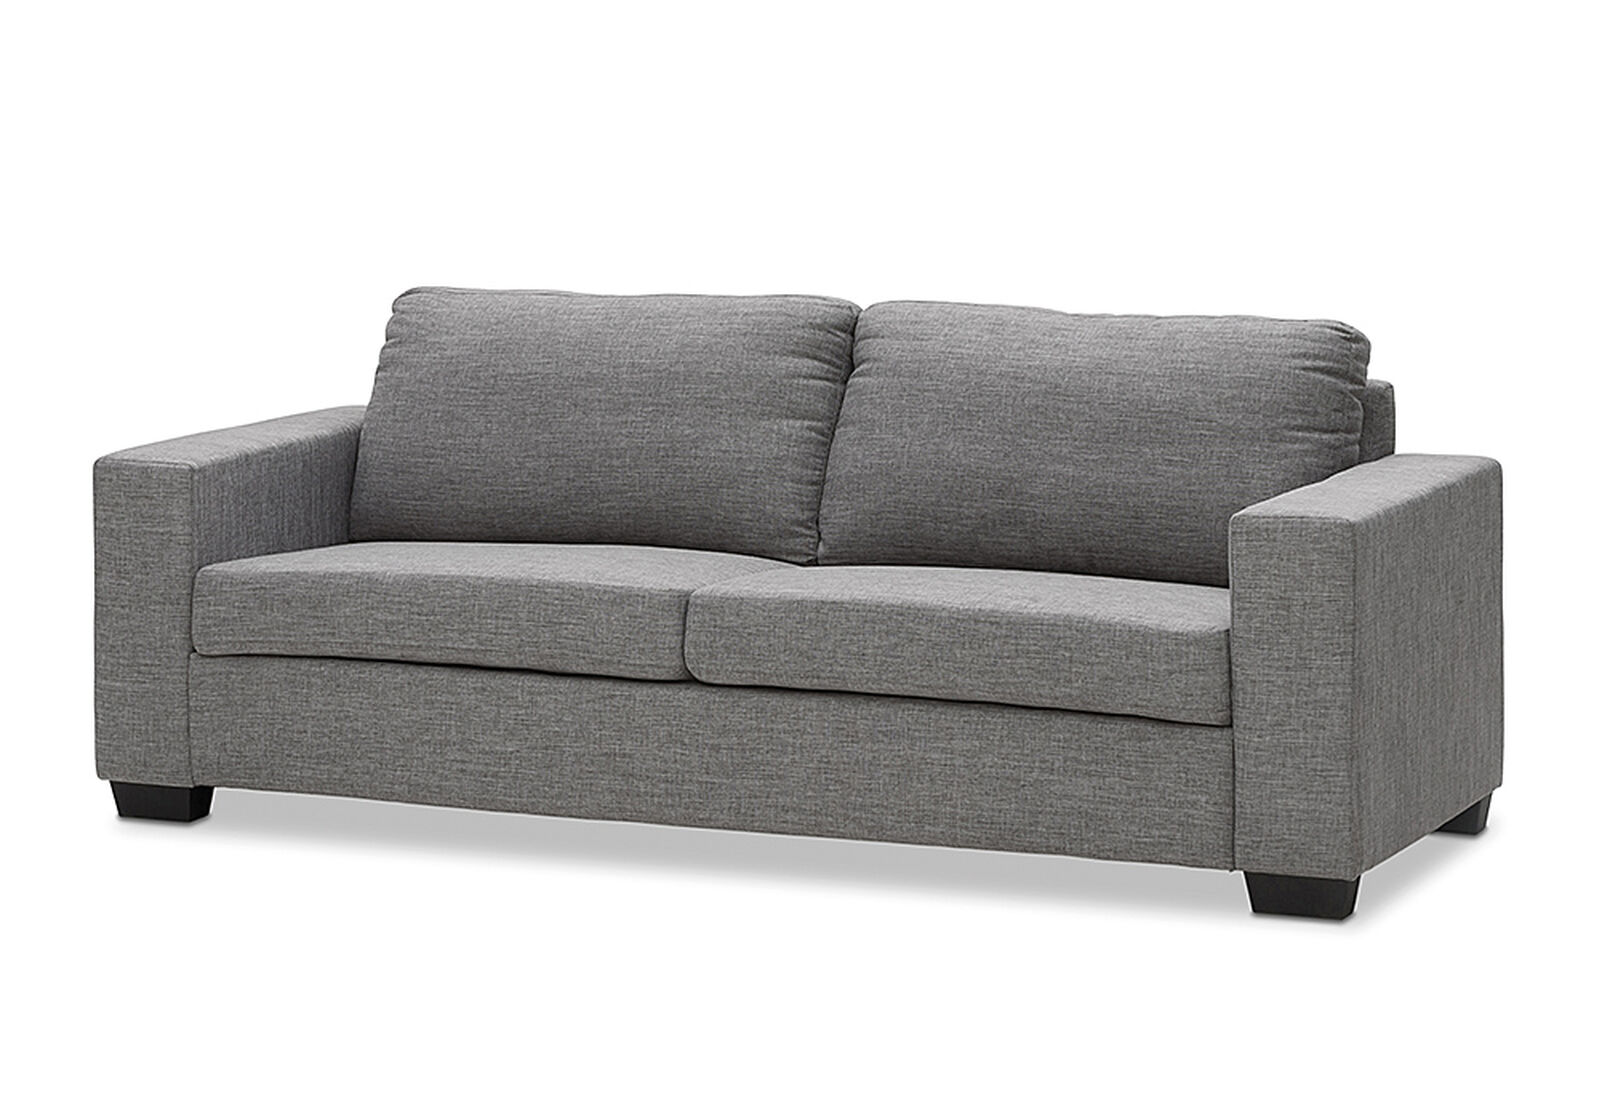 Grey Bonza Fabric 3 Seater Sofa Amart, How Much Fabric To Cover A 3 Seater Sofa